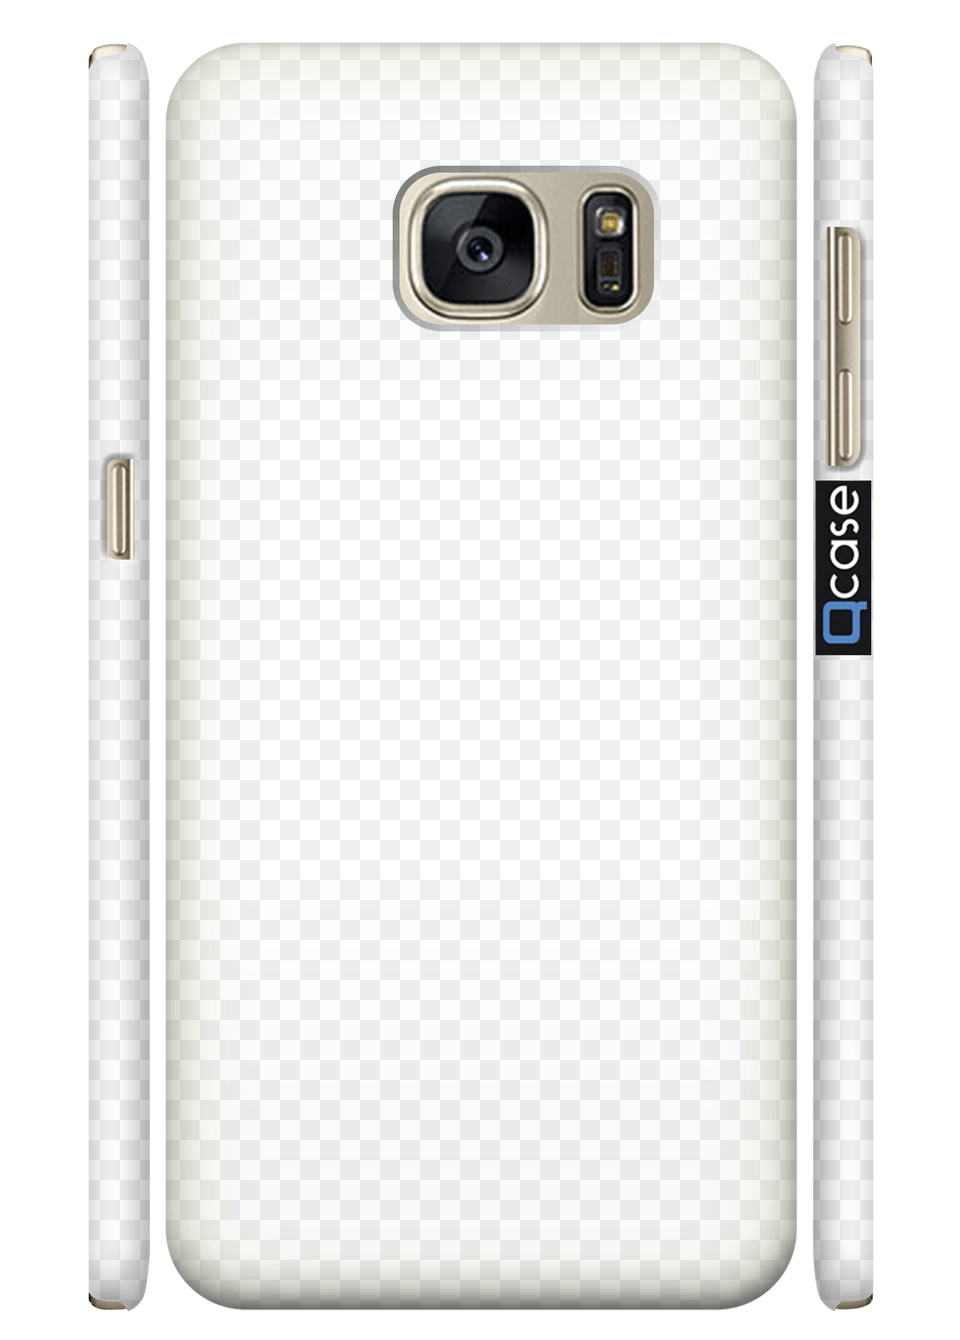 Back Productoverlay Mobile Phone, Electronics, Mobile Phone Png Image